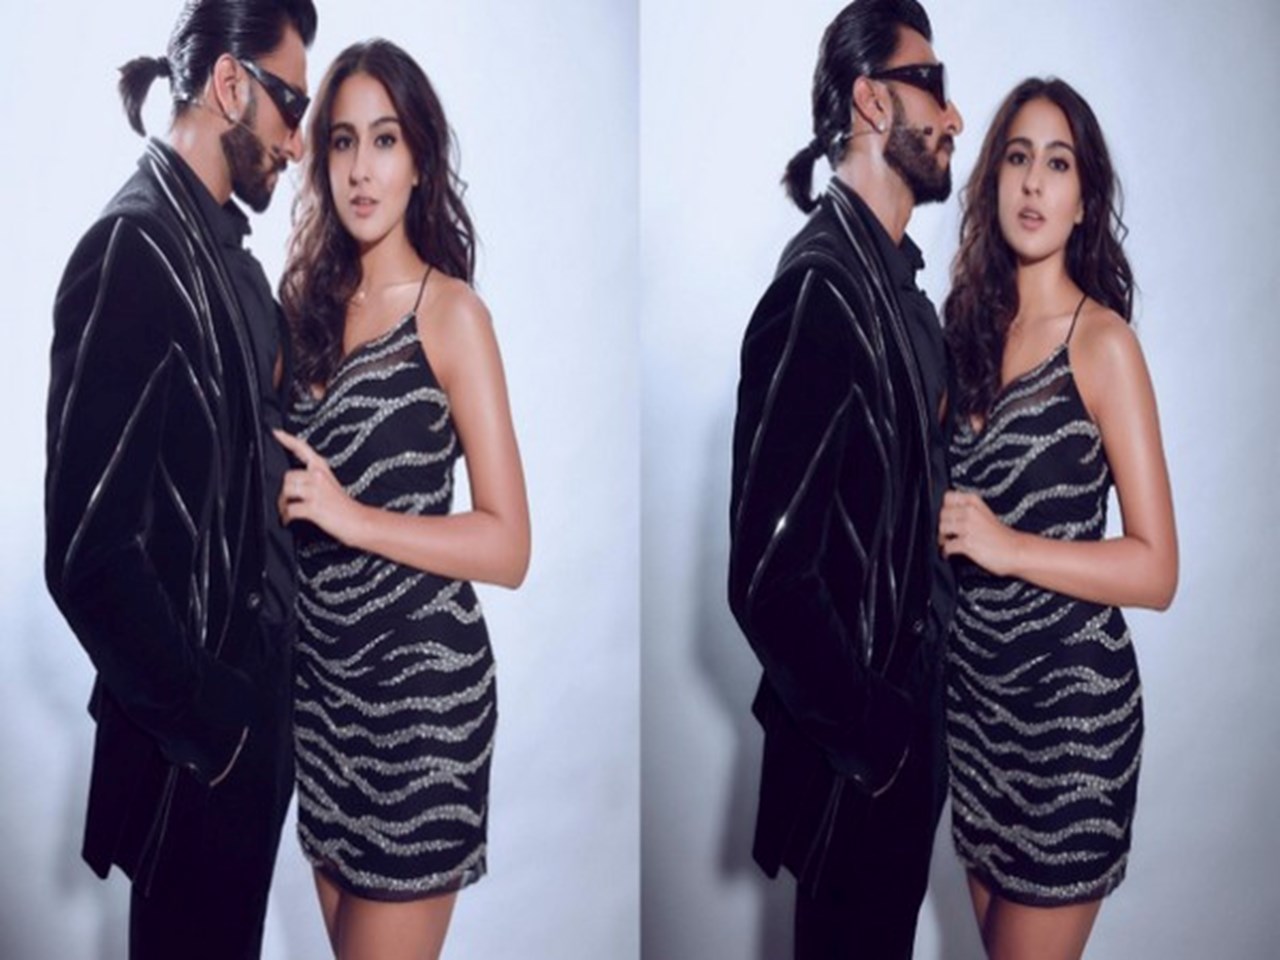 Ranveer Singh On His 'Atrangi' Fashion Choices: Playing Dress Up Is Fun  For Me